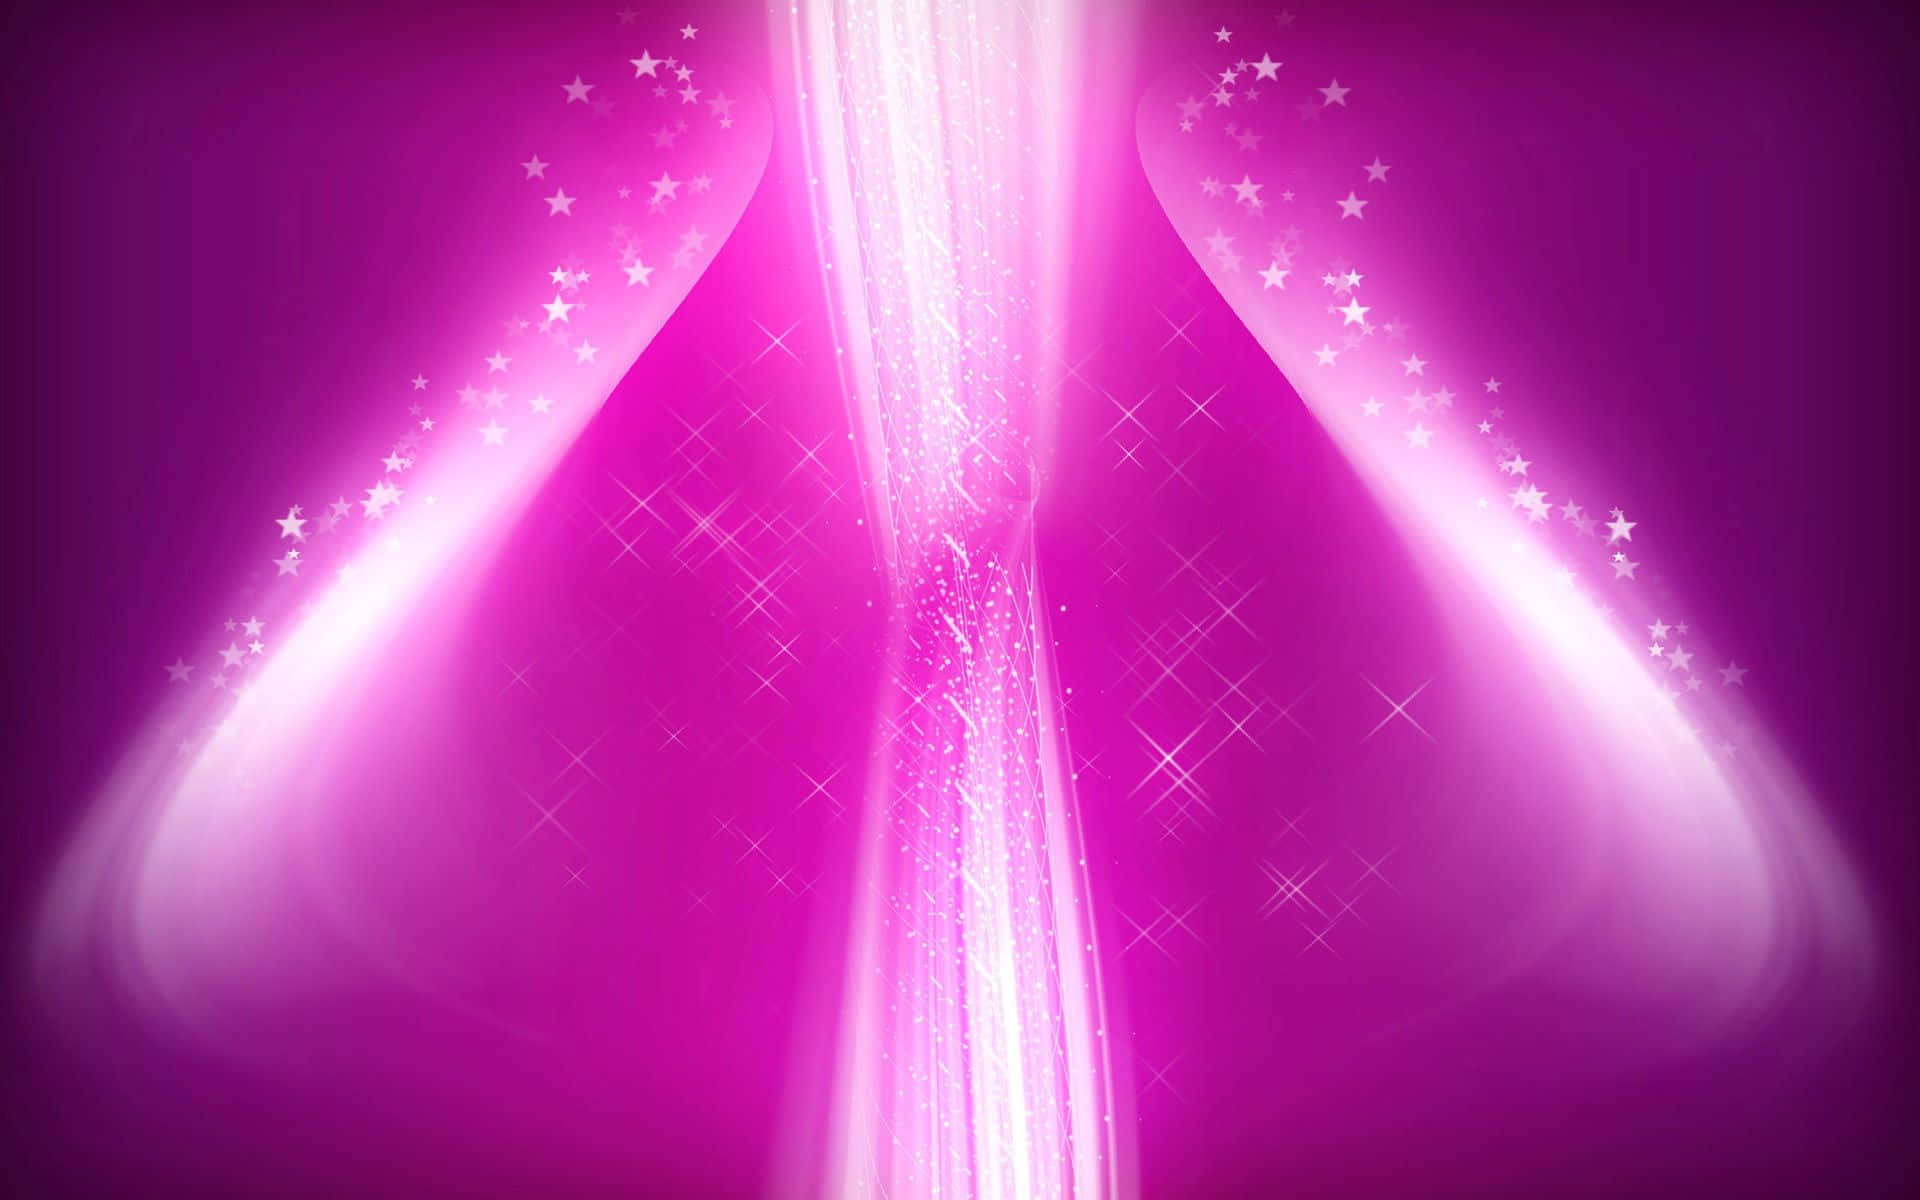 A Vibrant, Alluring Pink Abstract Background